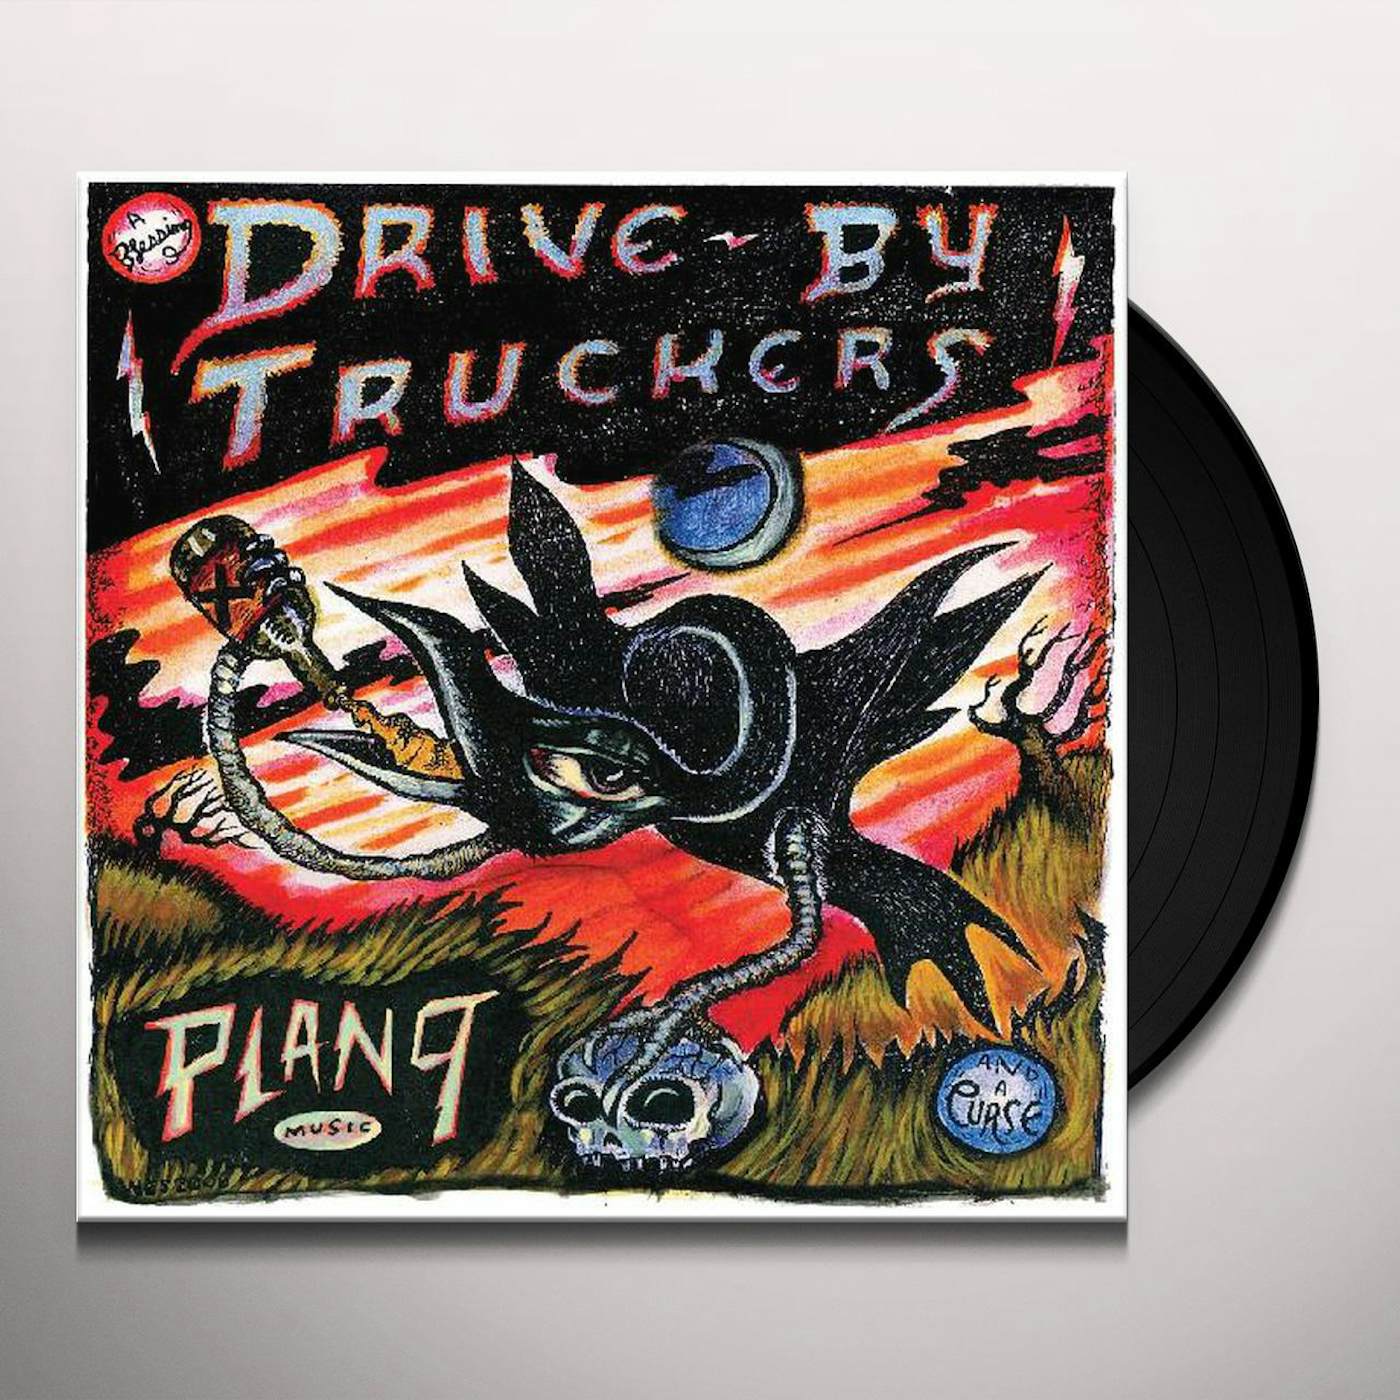 Drive-By Truckers PLAN 9 RECORDS JULY 13, 2006 (3LP) Vinyl Record